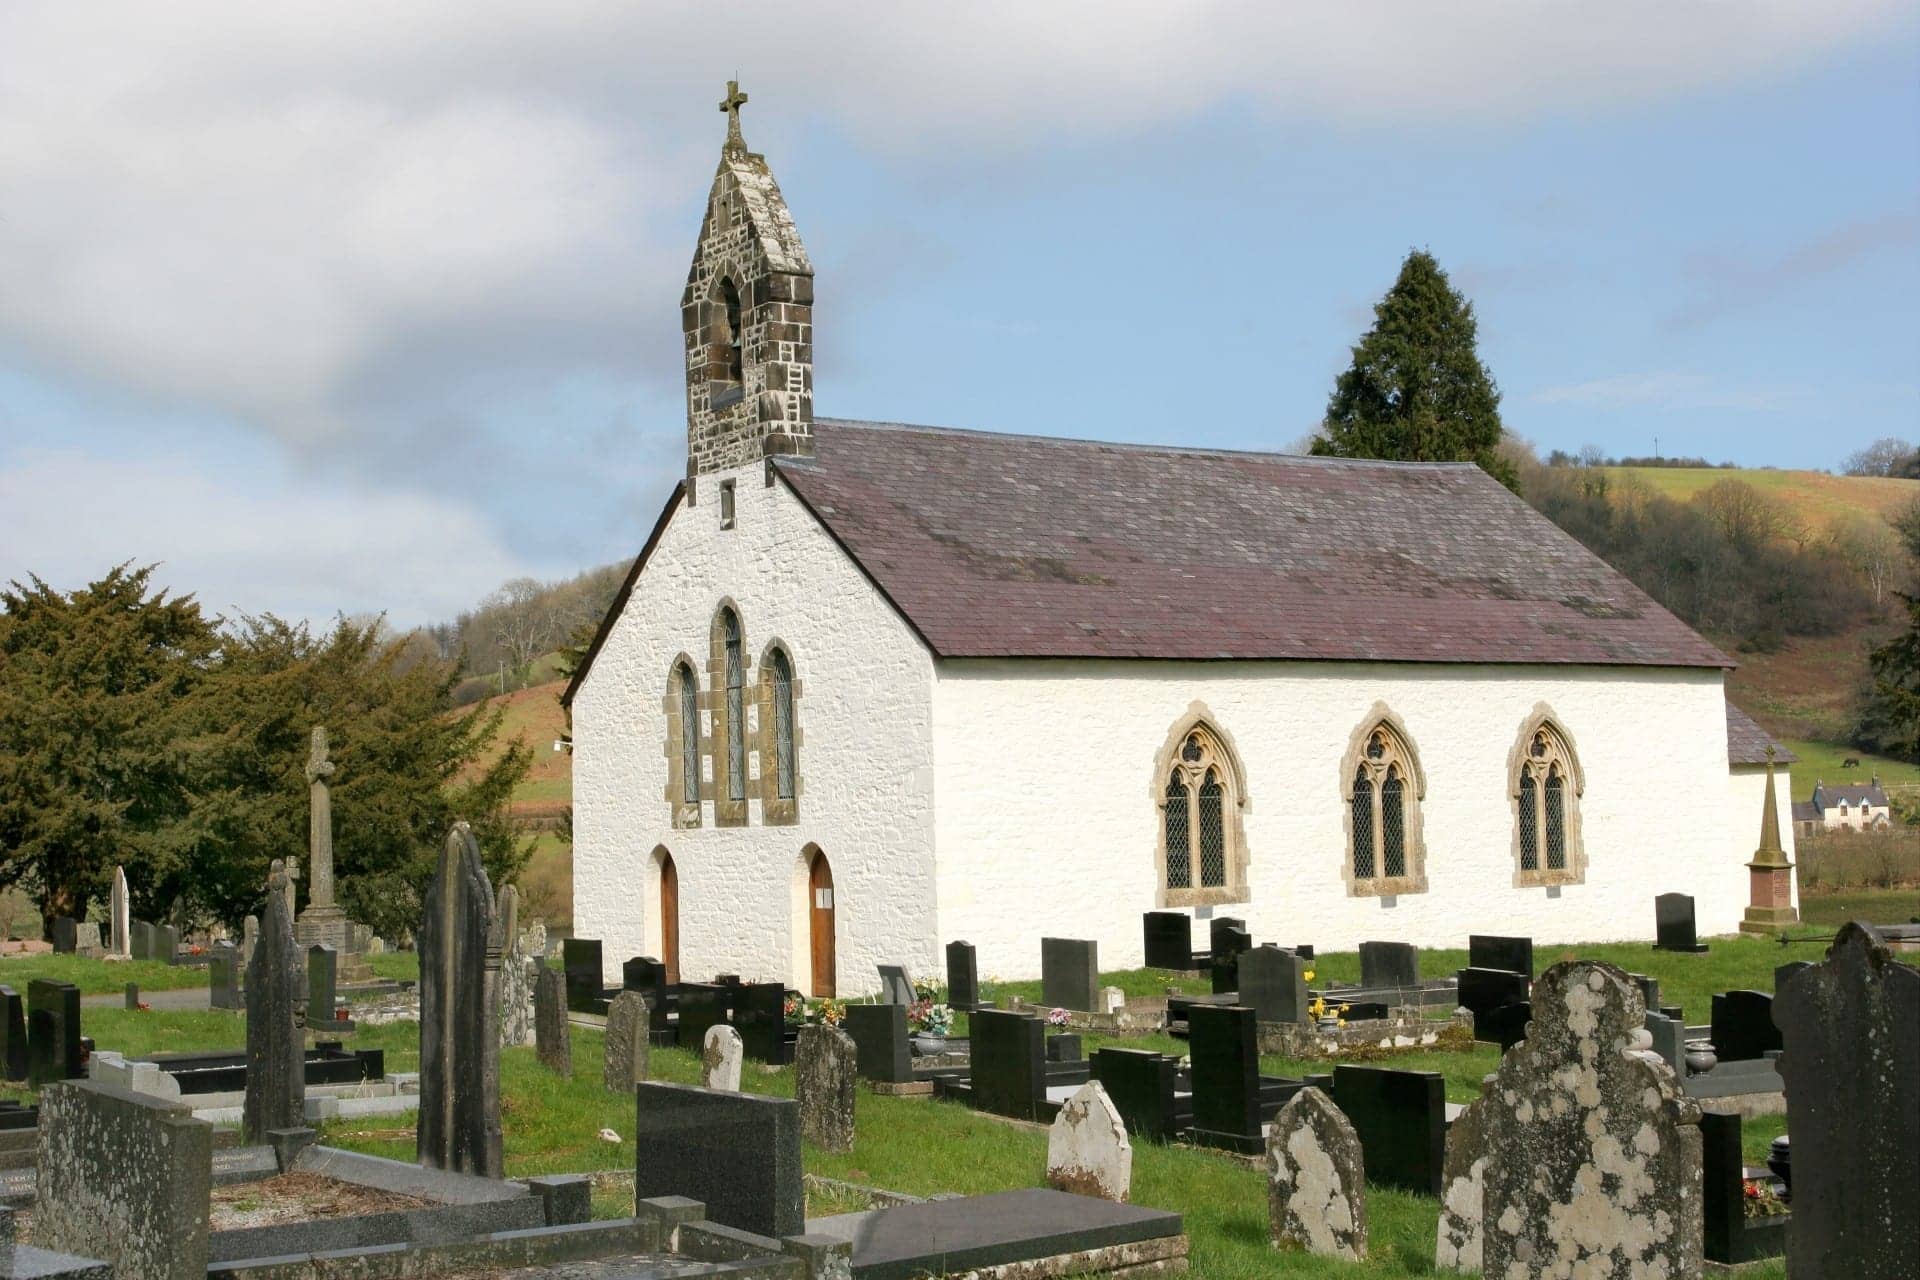 A chapel with the graveyard in the picture in wales